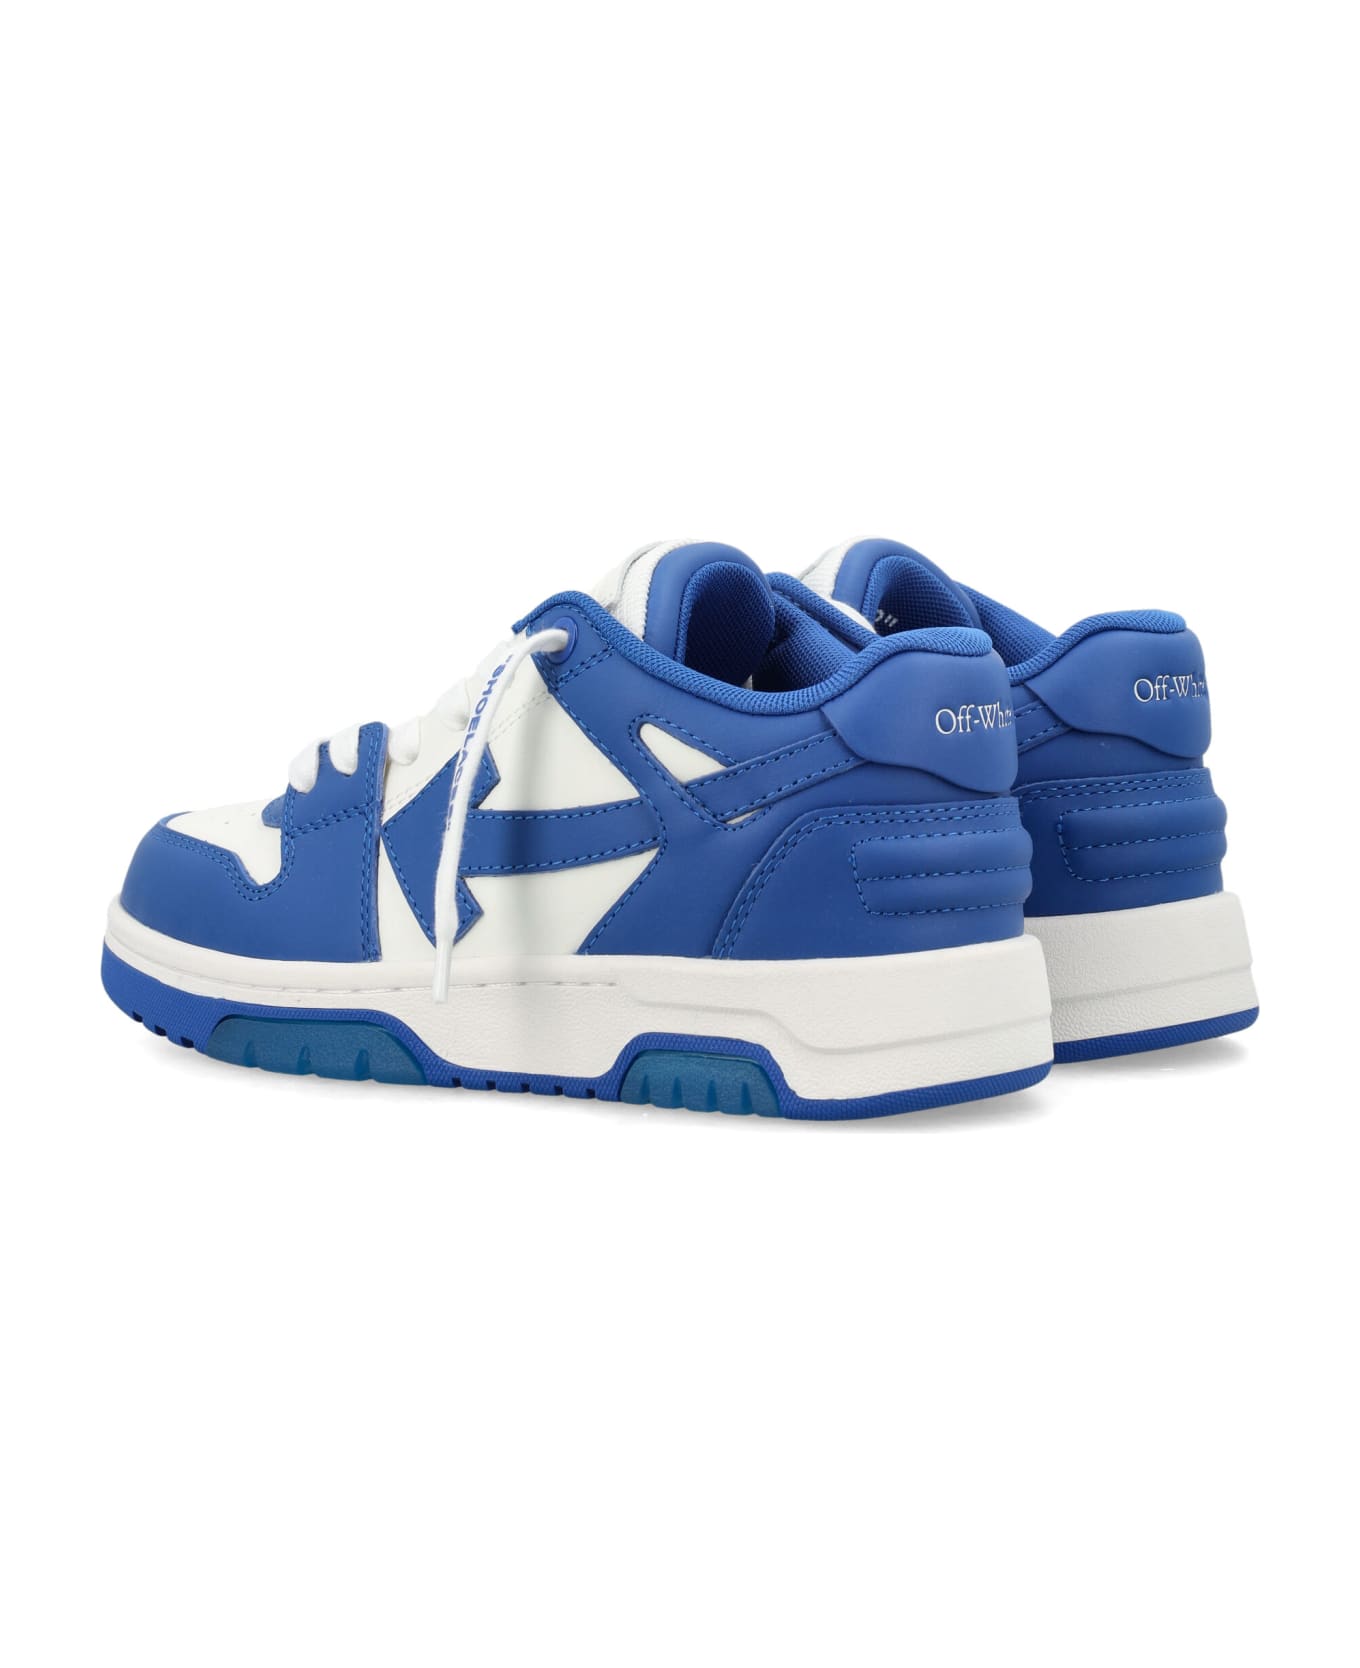 Off-White Out Of Office Sneakers - WHITE BLUE